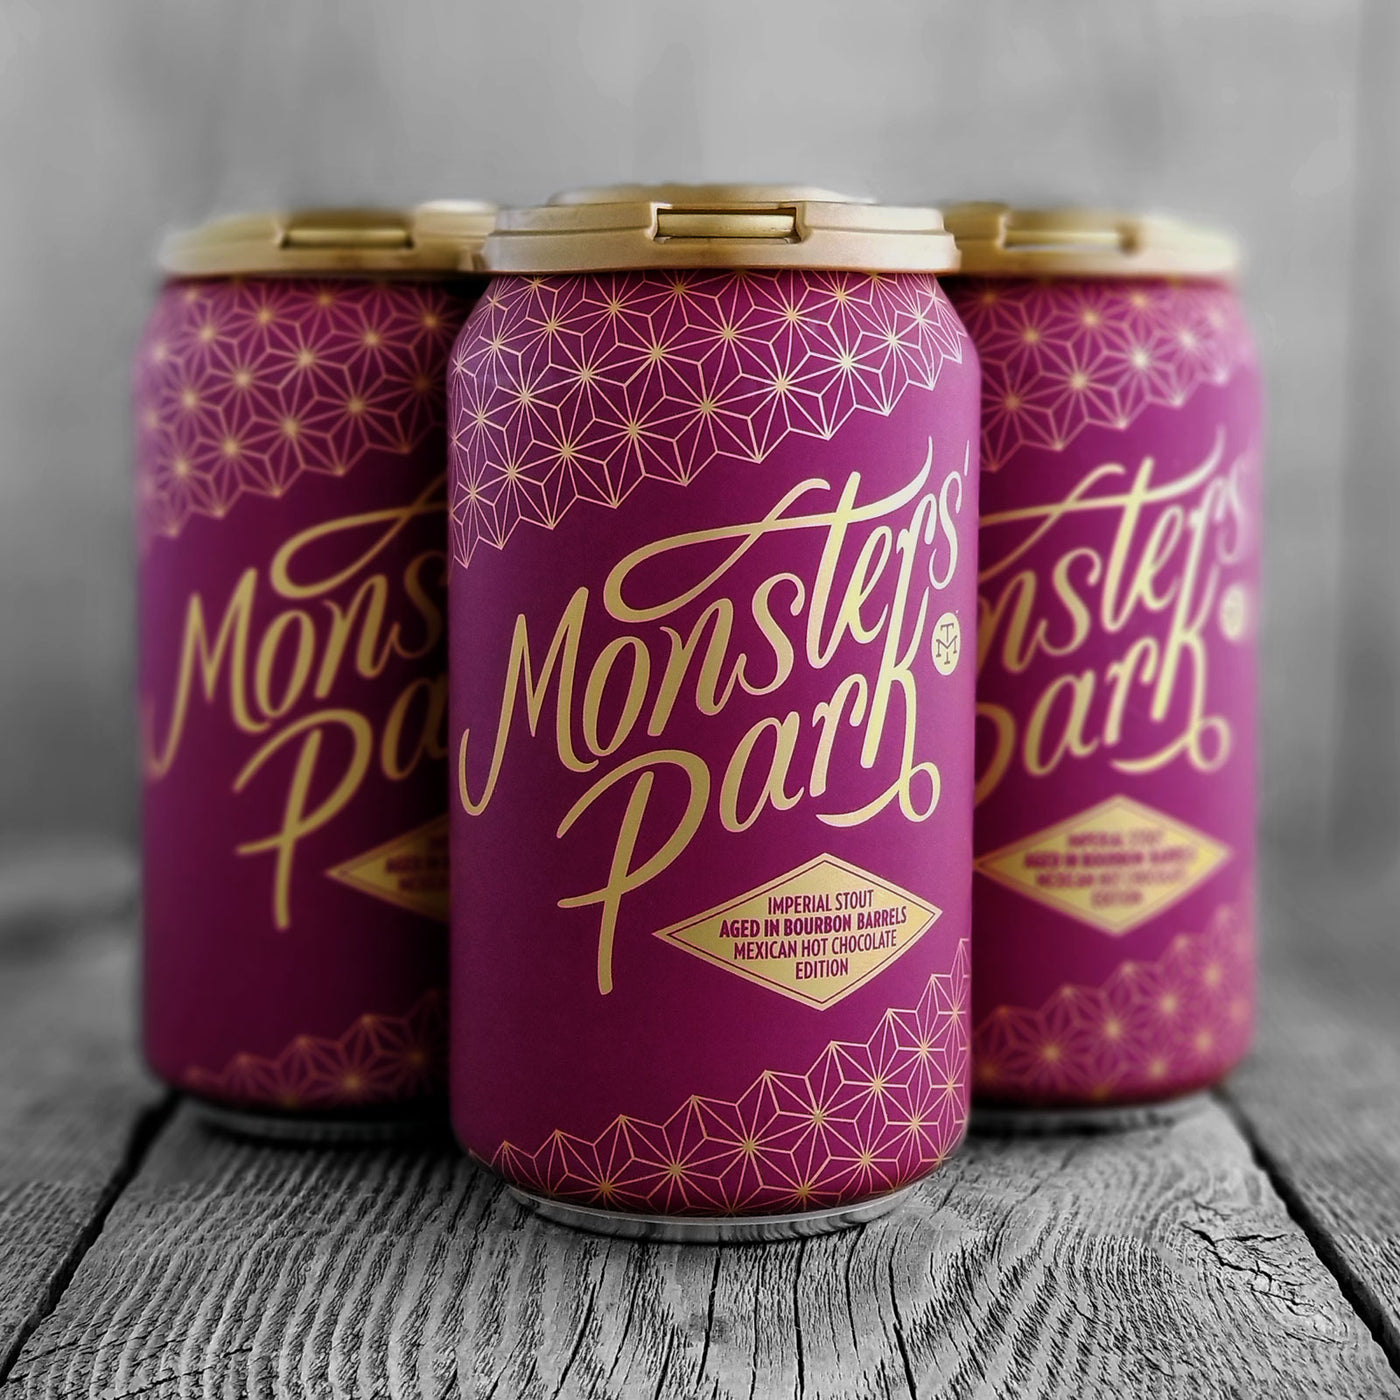 Modern Times Monsters' Park Mexican Hot Chocolate Edition